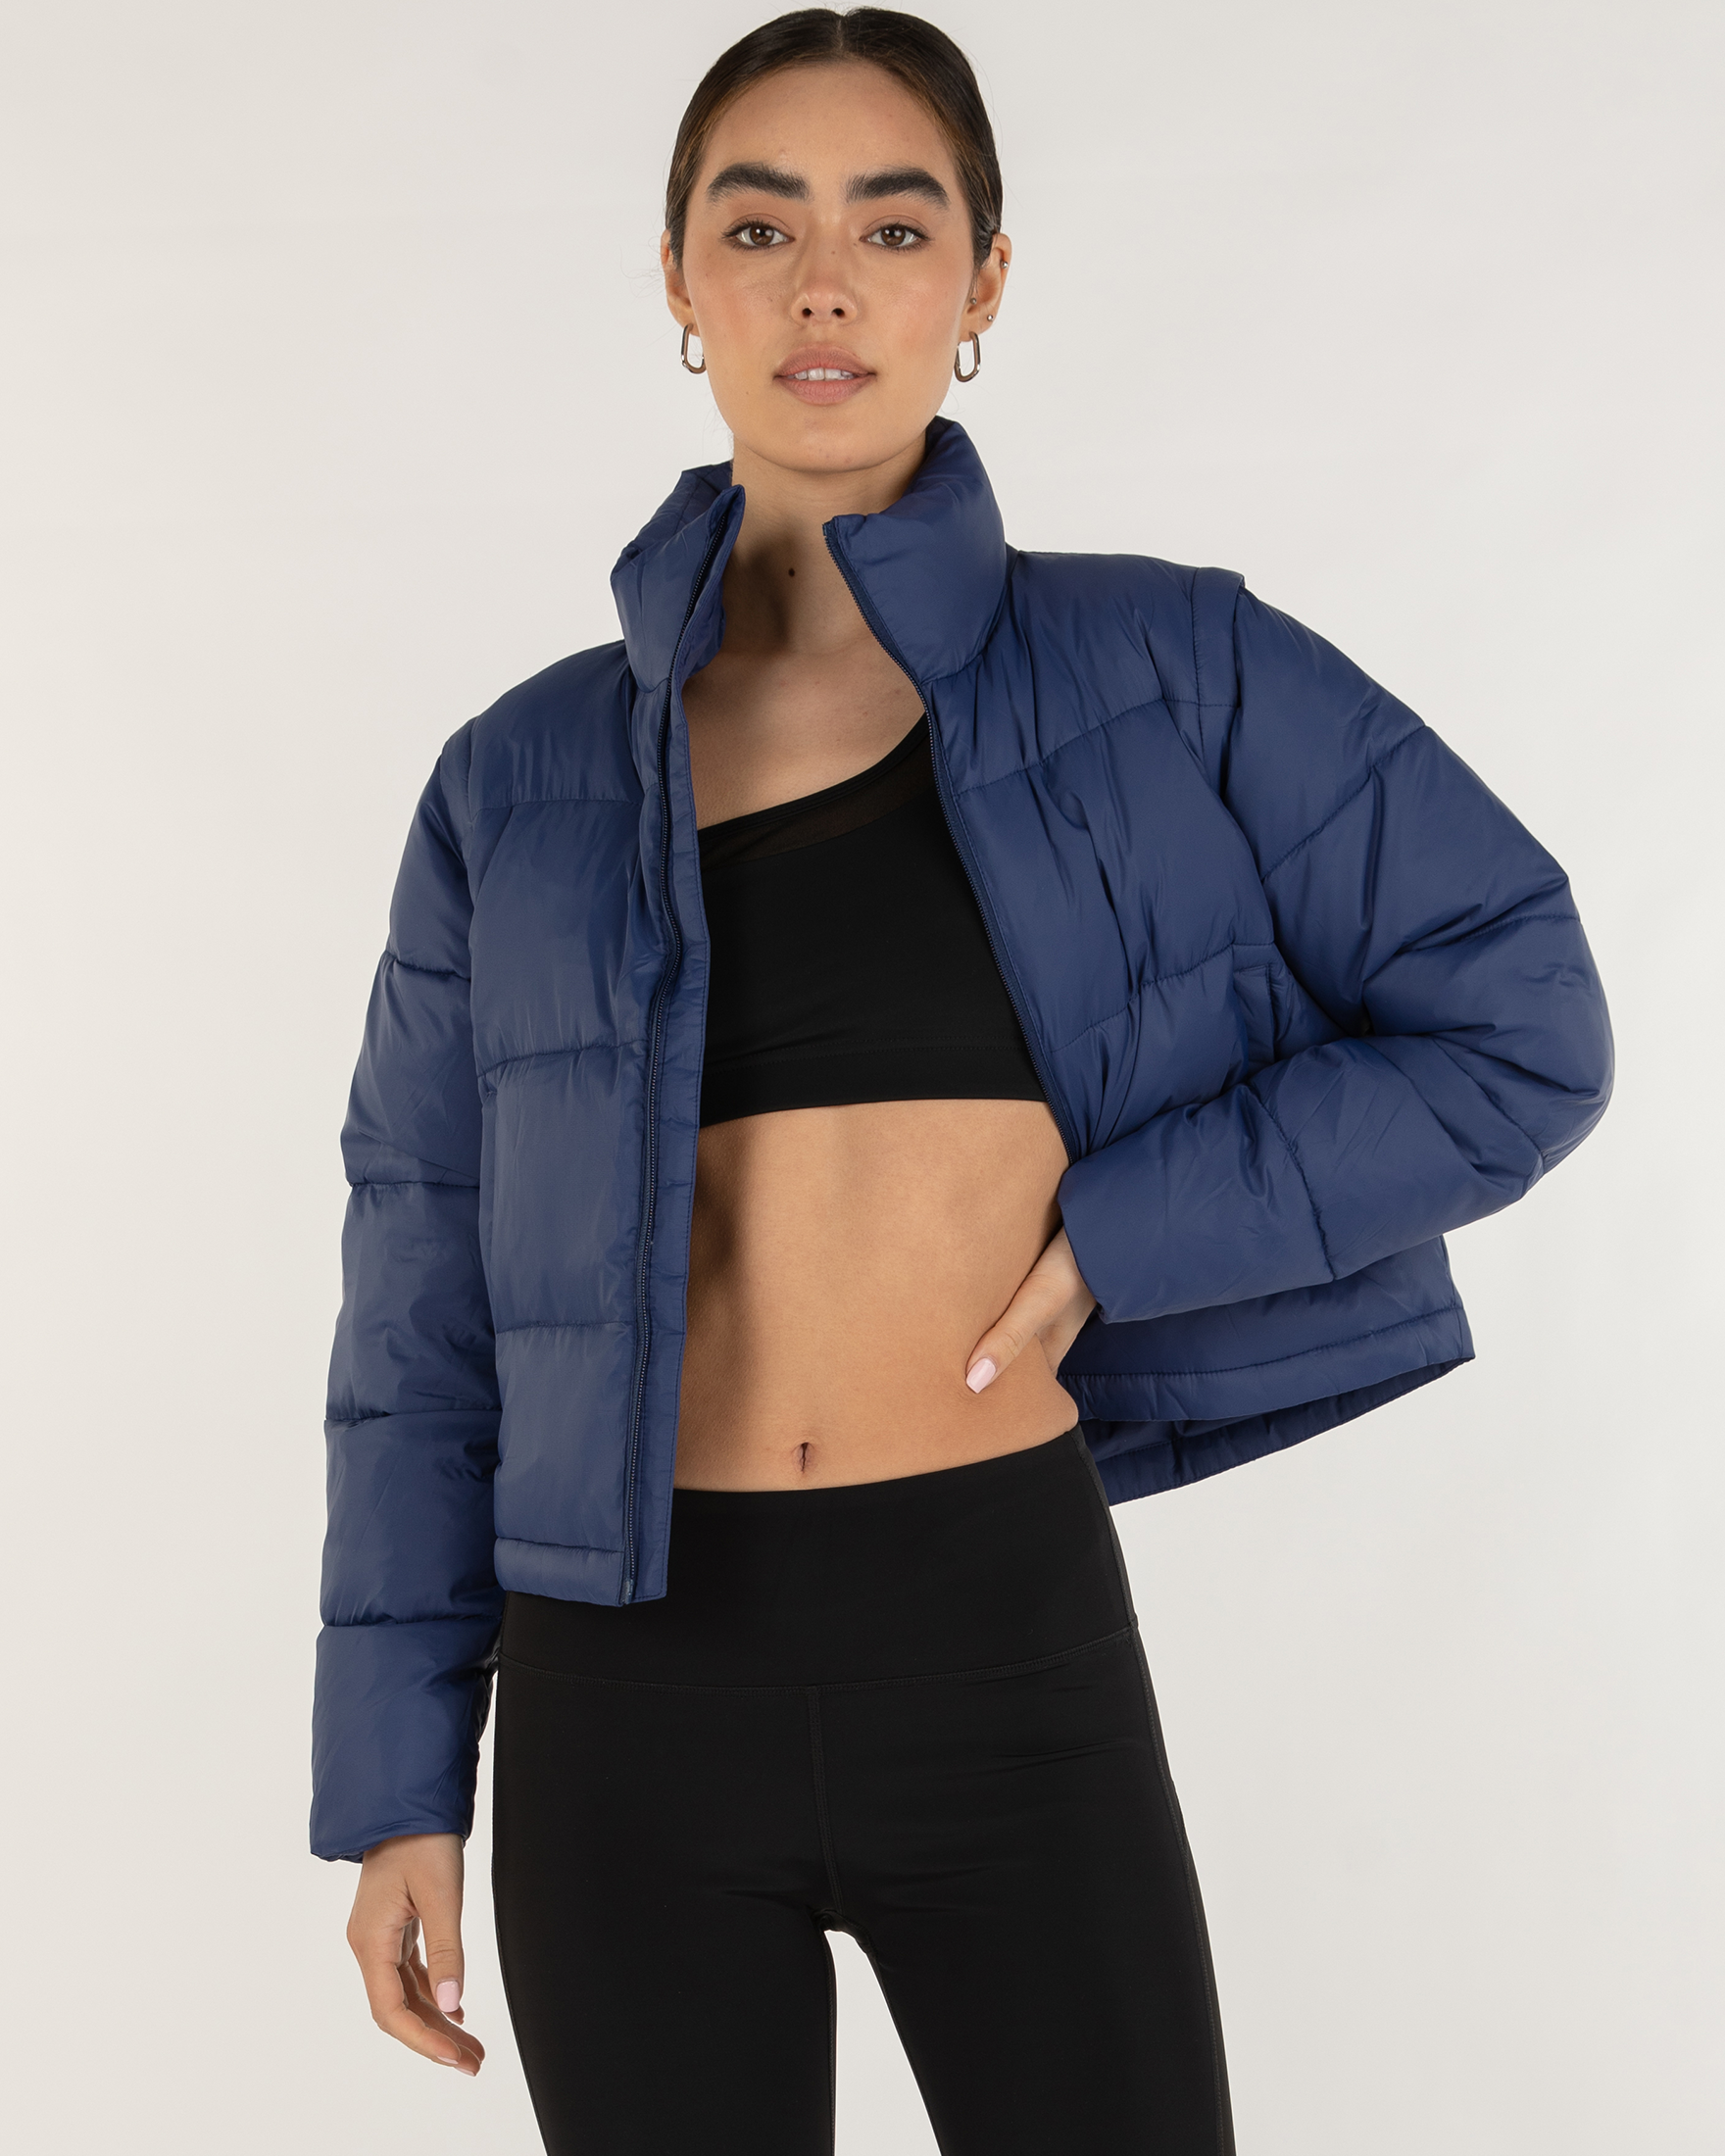 Move And Go - Puffer Jacket for Women